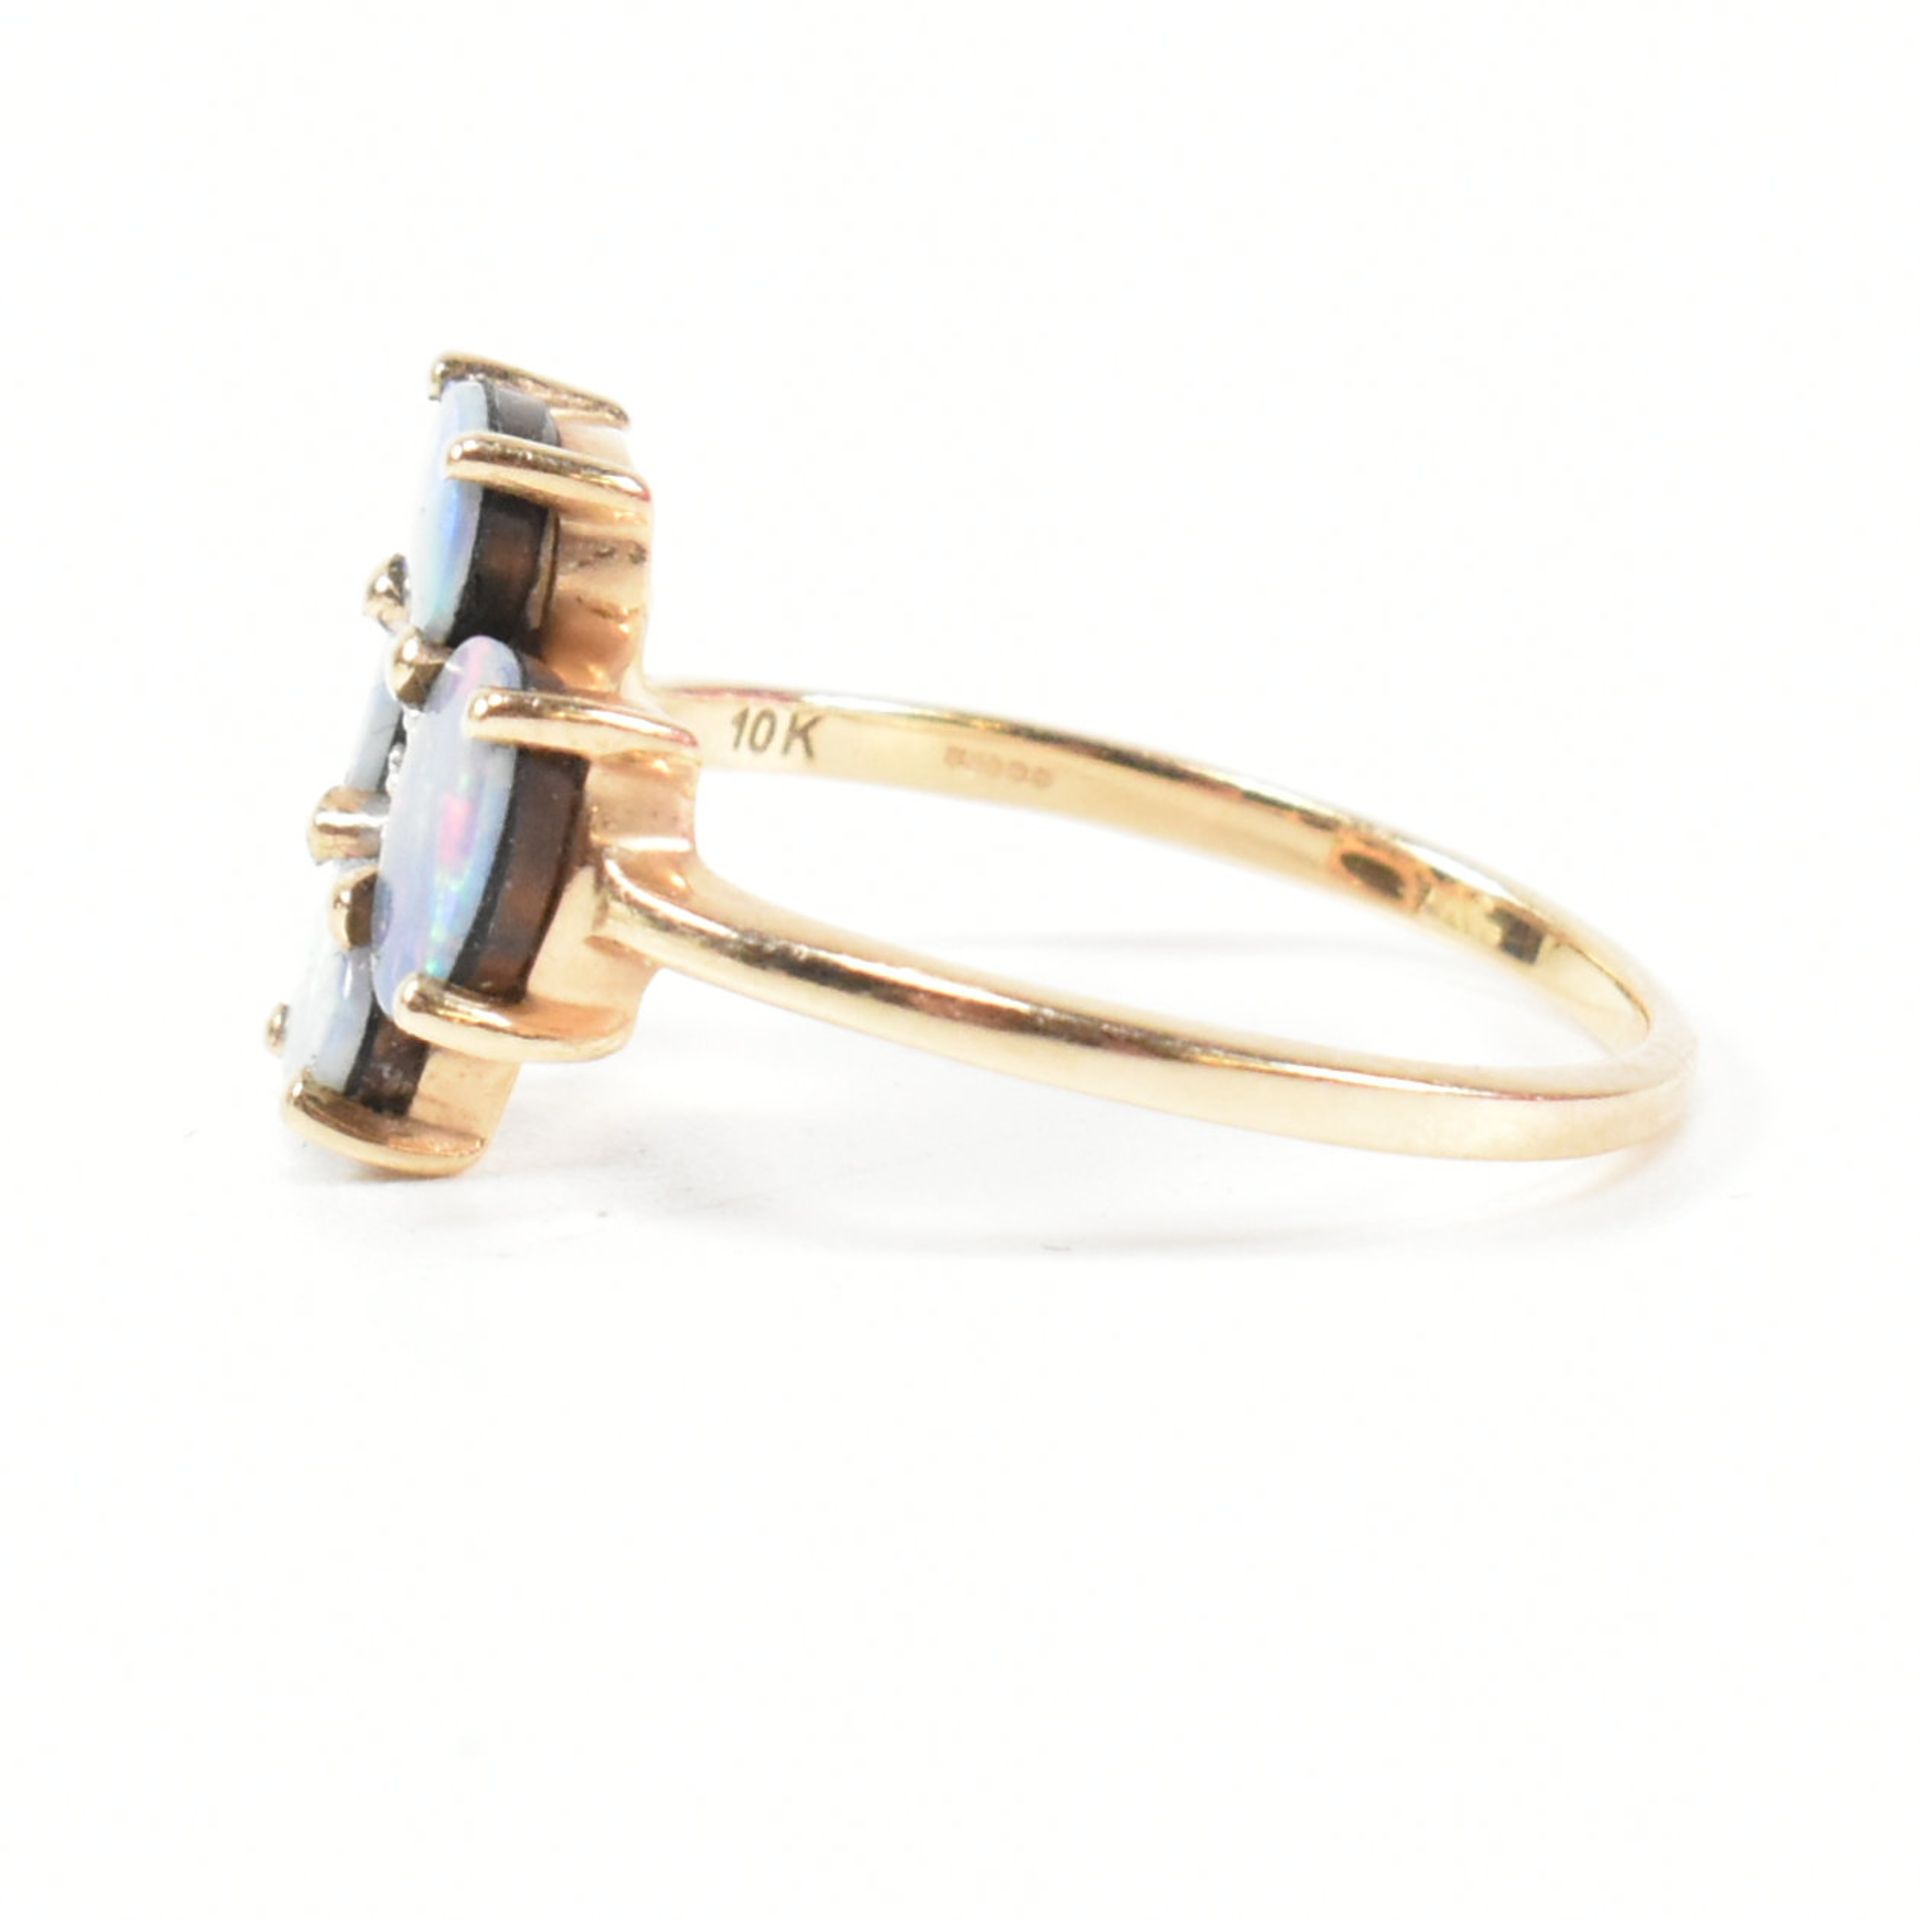 HALLMARKED 9CT GOLD & OPAL DOUBLET RING - Image 3 of 8